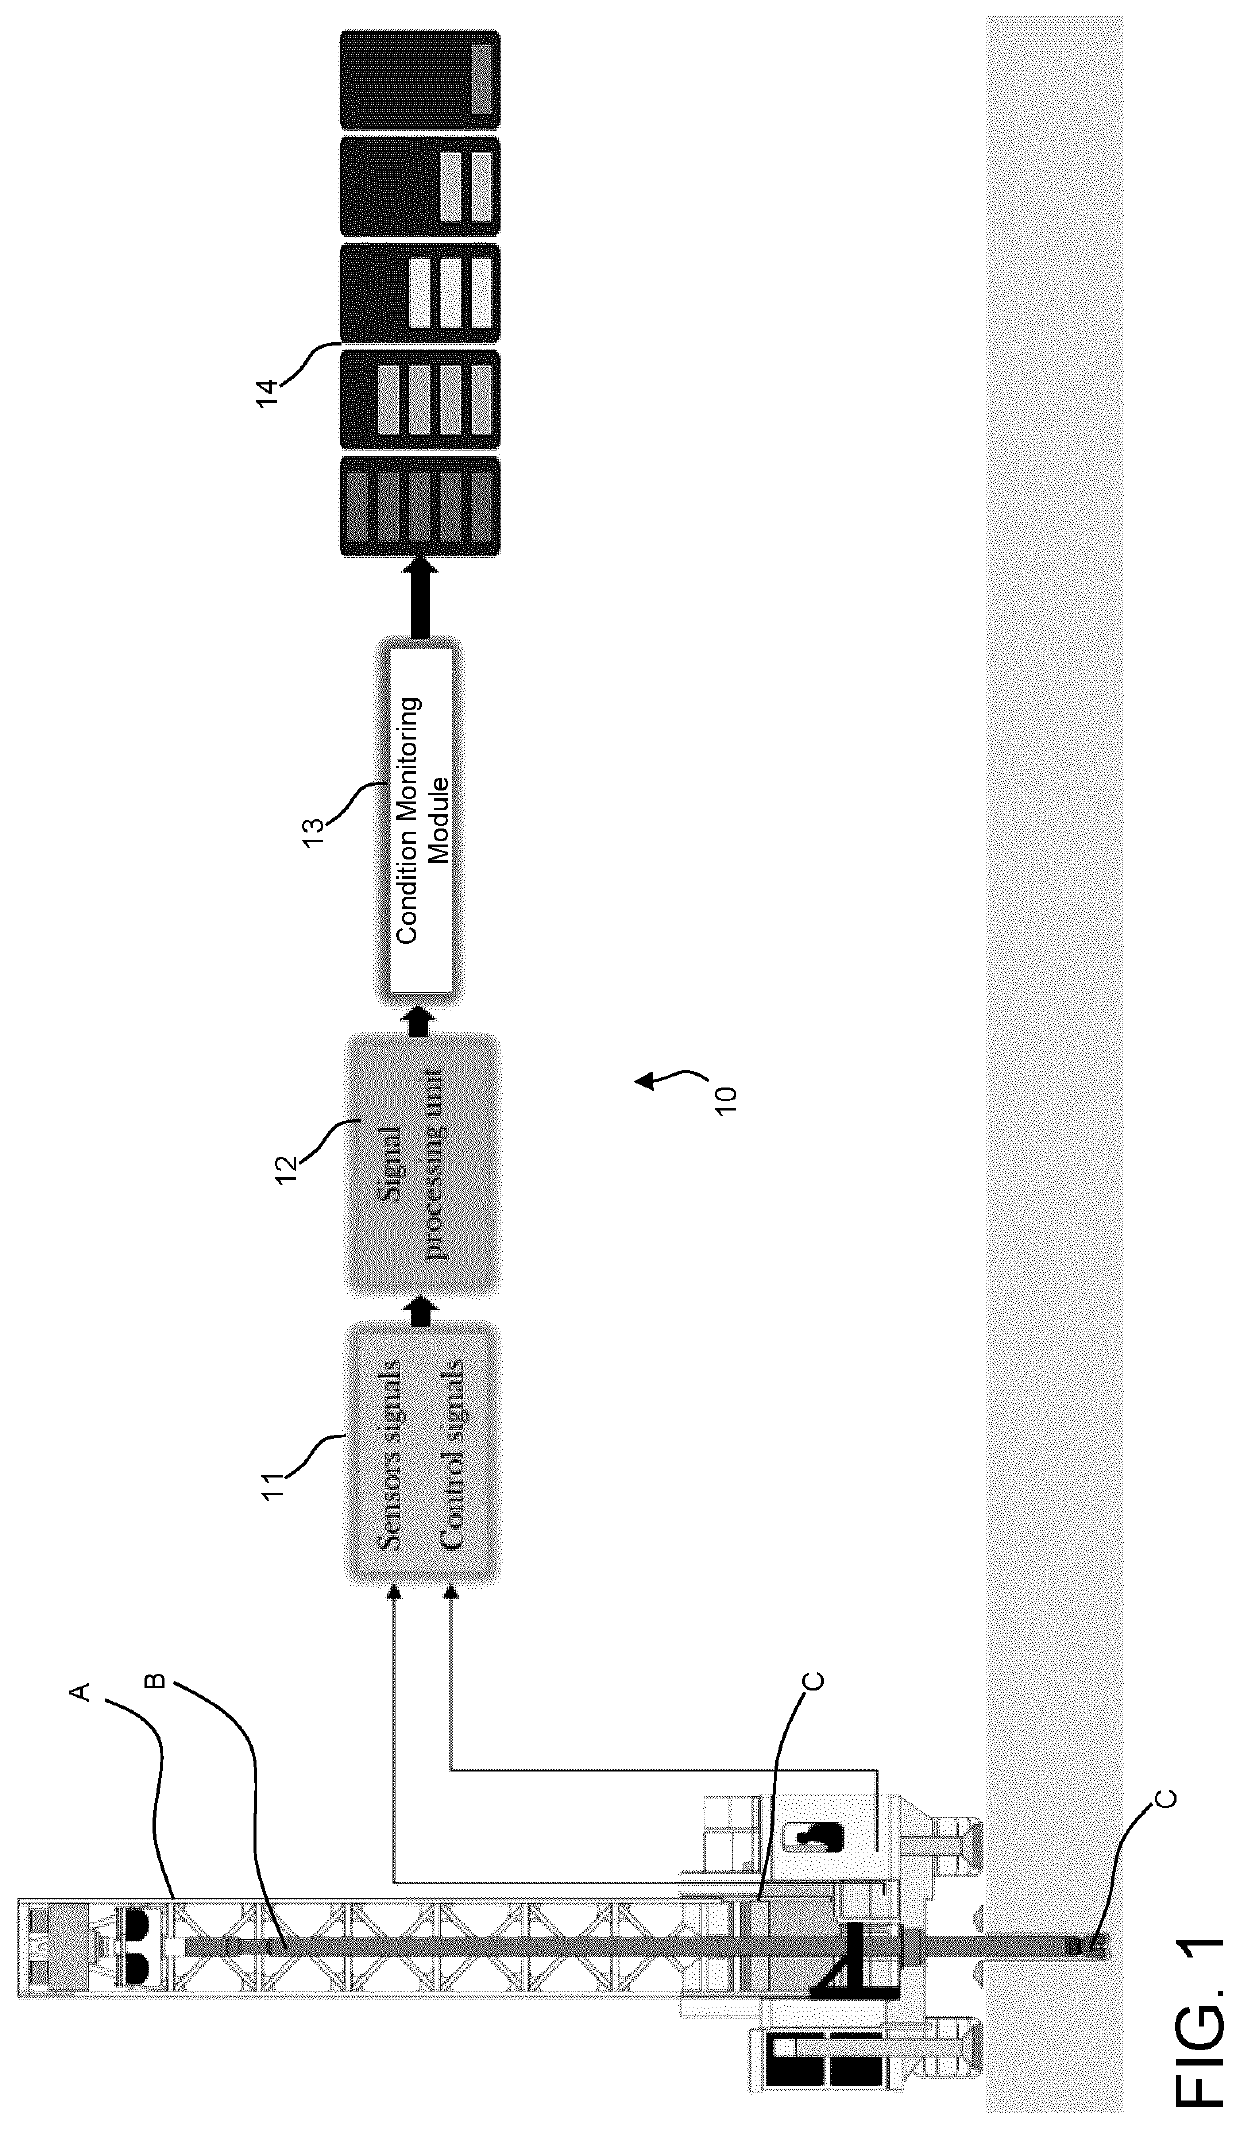 Bit condition monitoring system and method